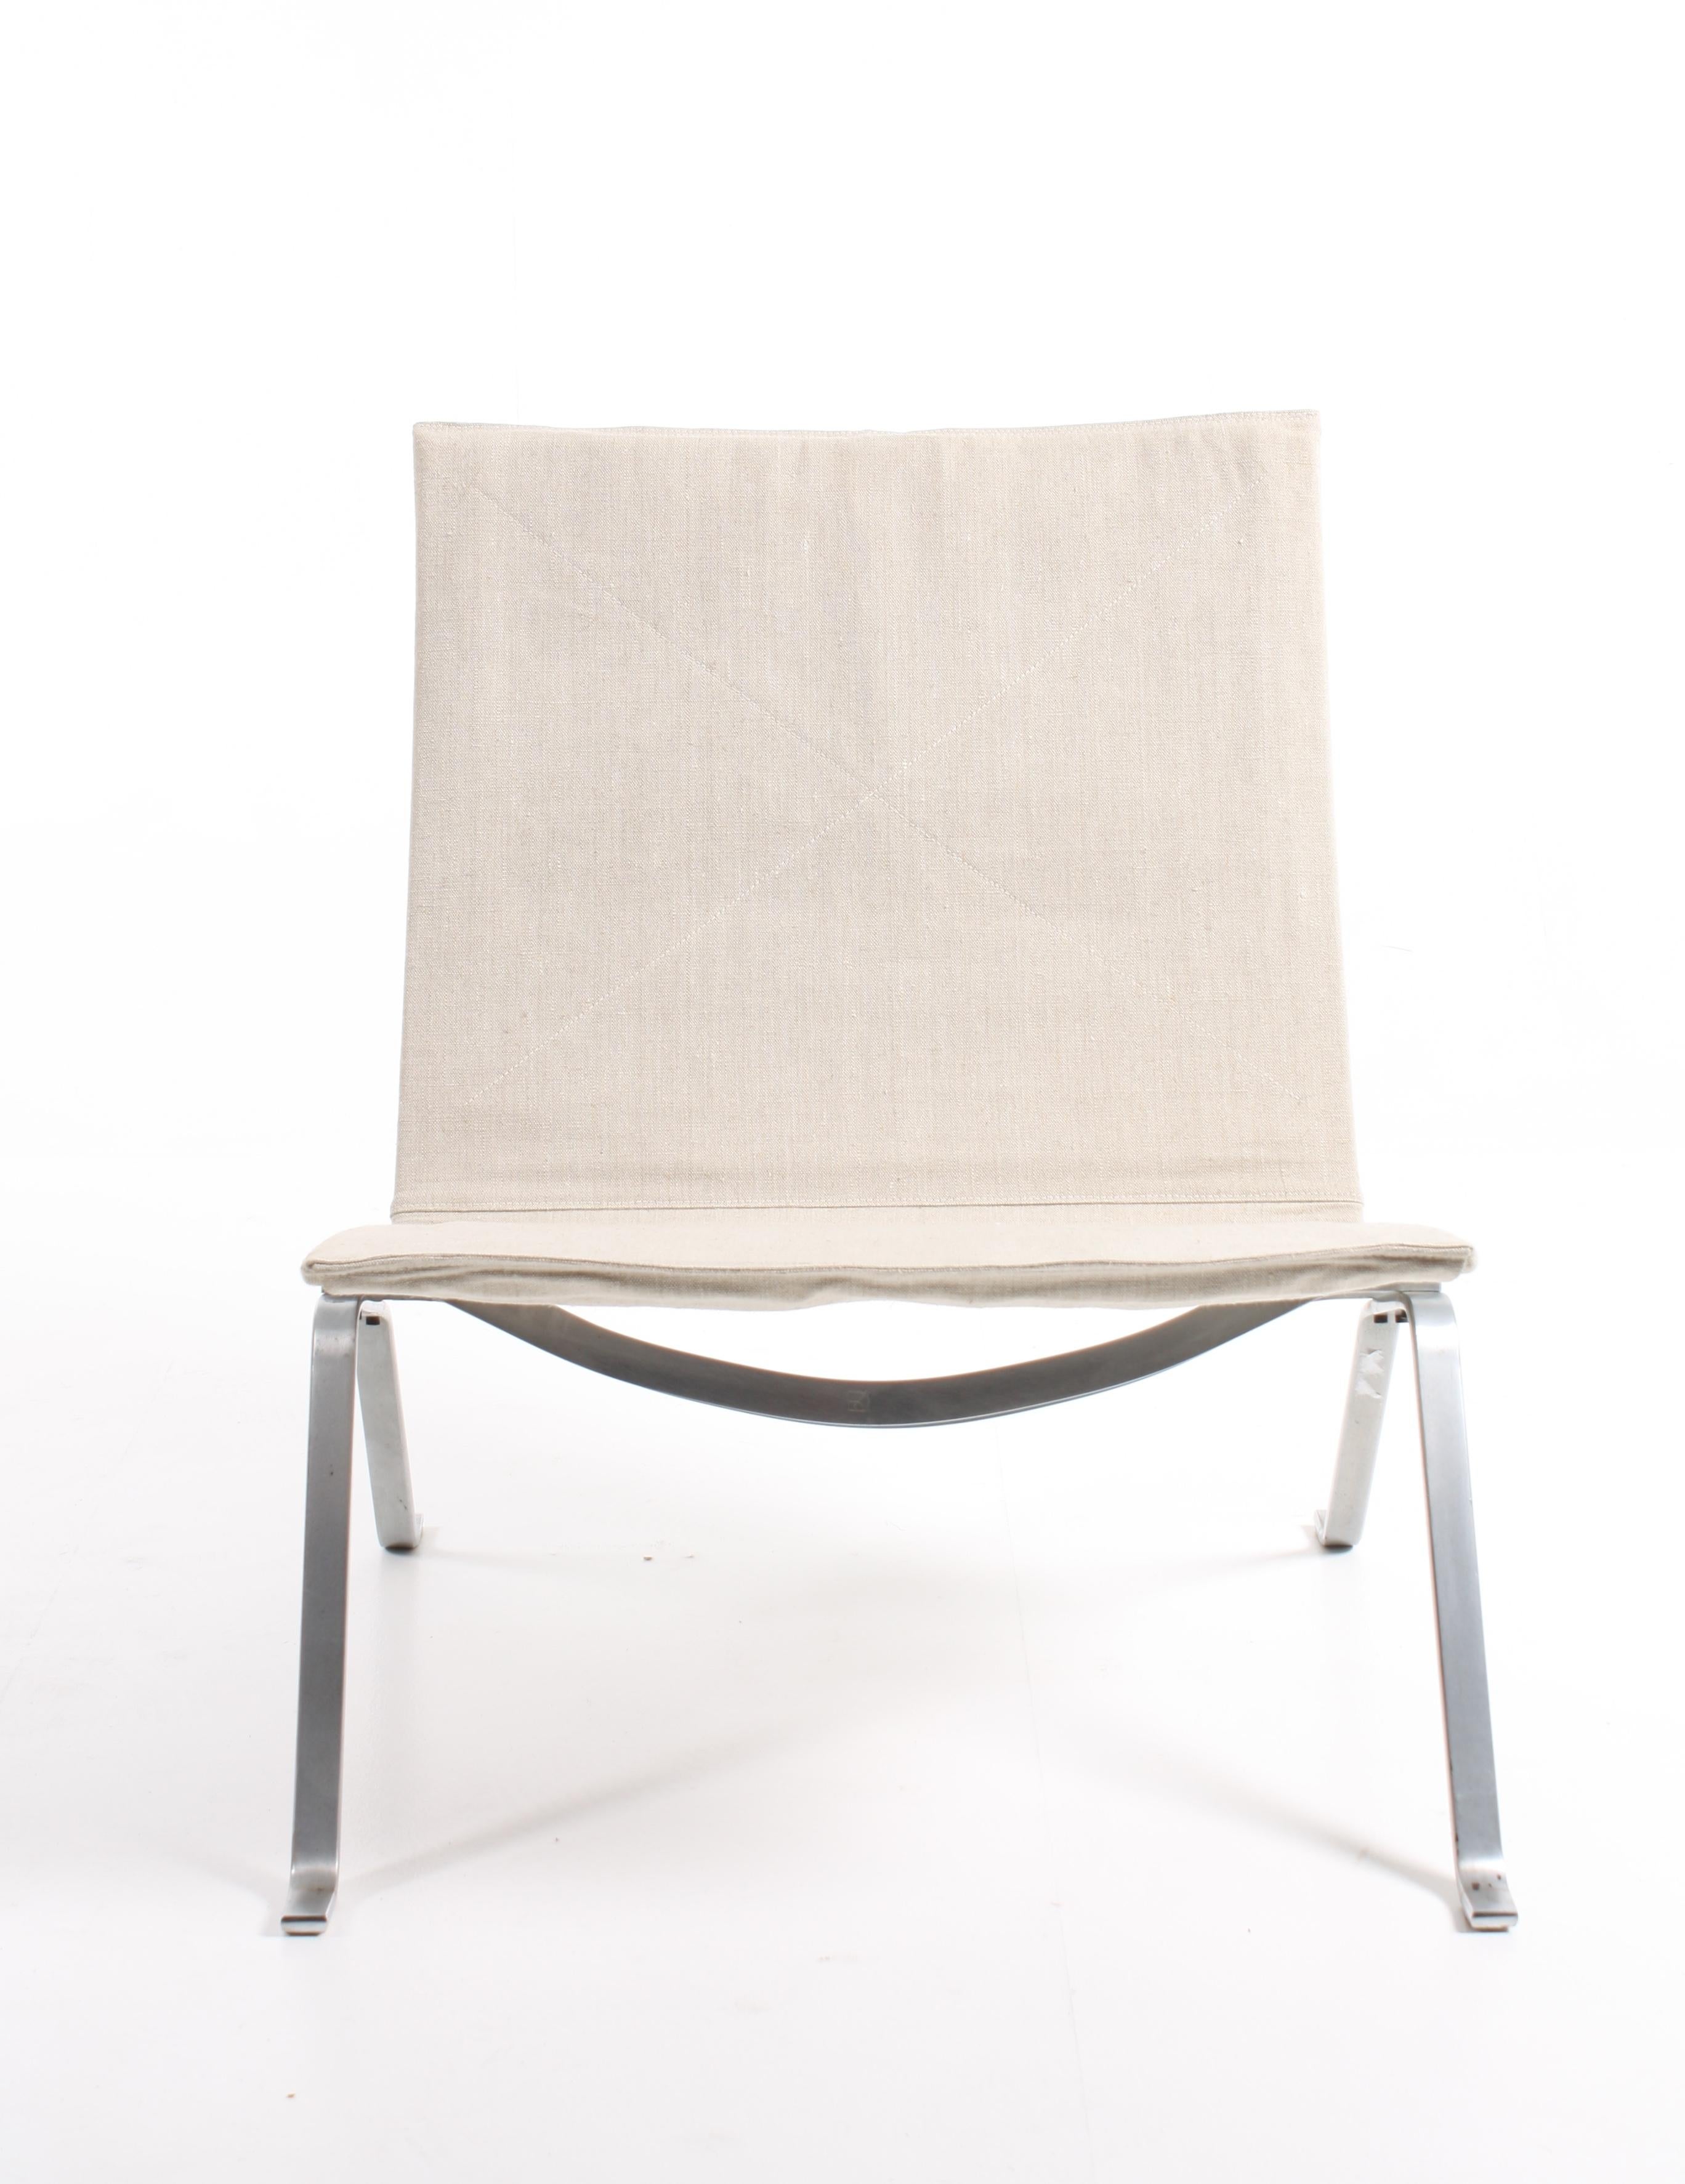 Mid-20th Century Group of Four Midcentury PK22 Lounge Chairs in Canvas by Kjærholm, Danish Design